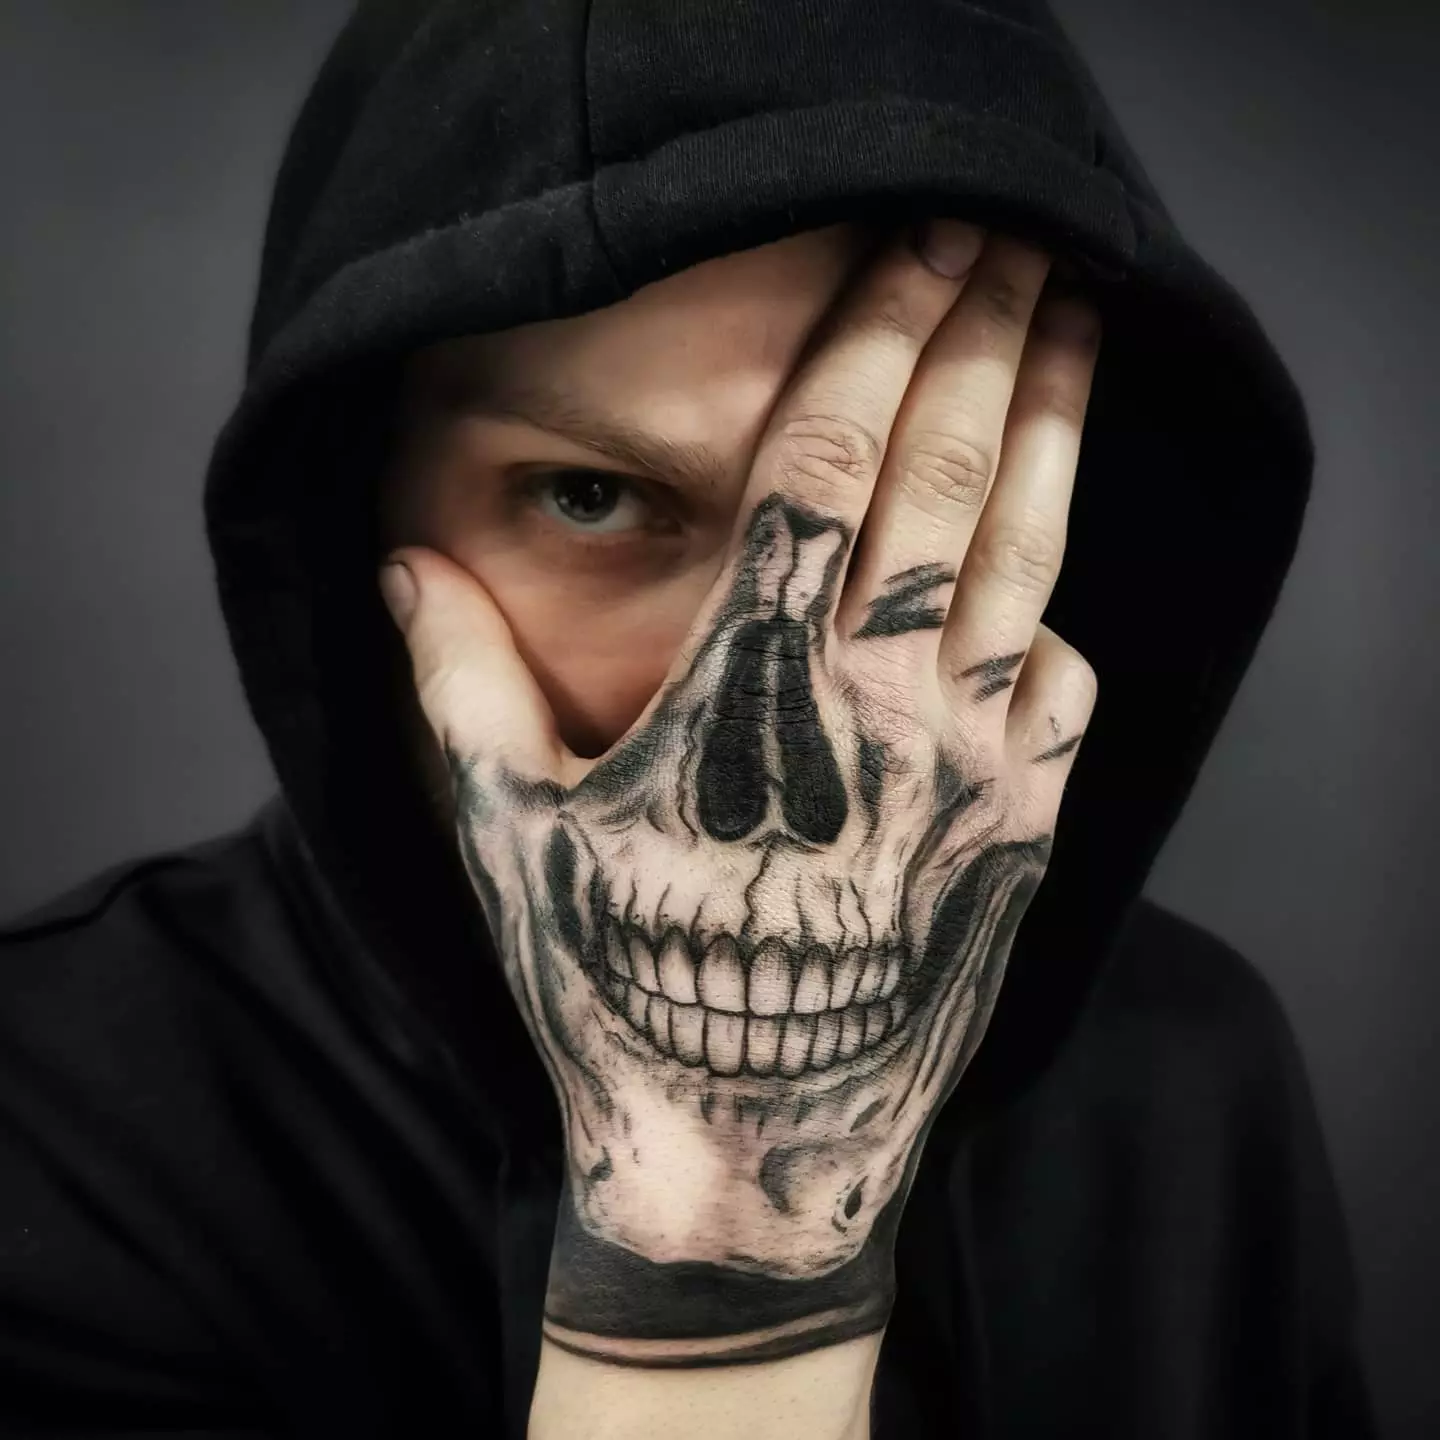 One More Example of Skeleton Smiling Face Hand Tattoo